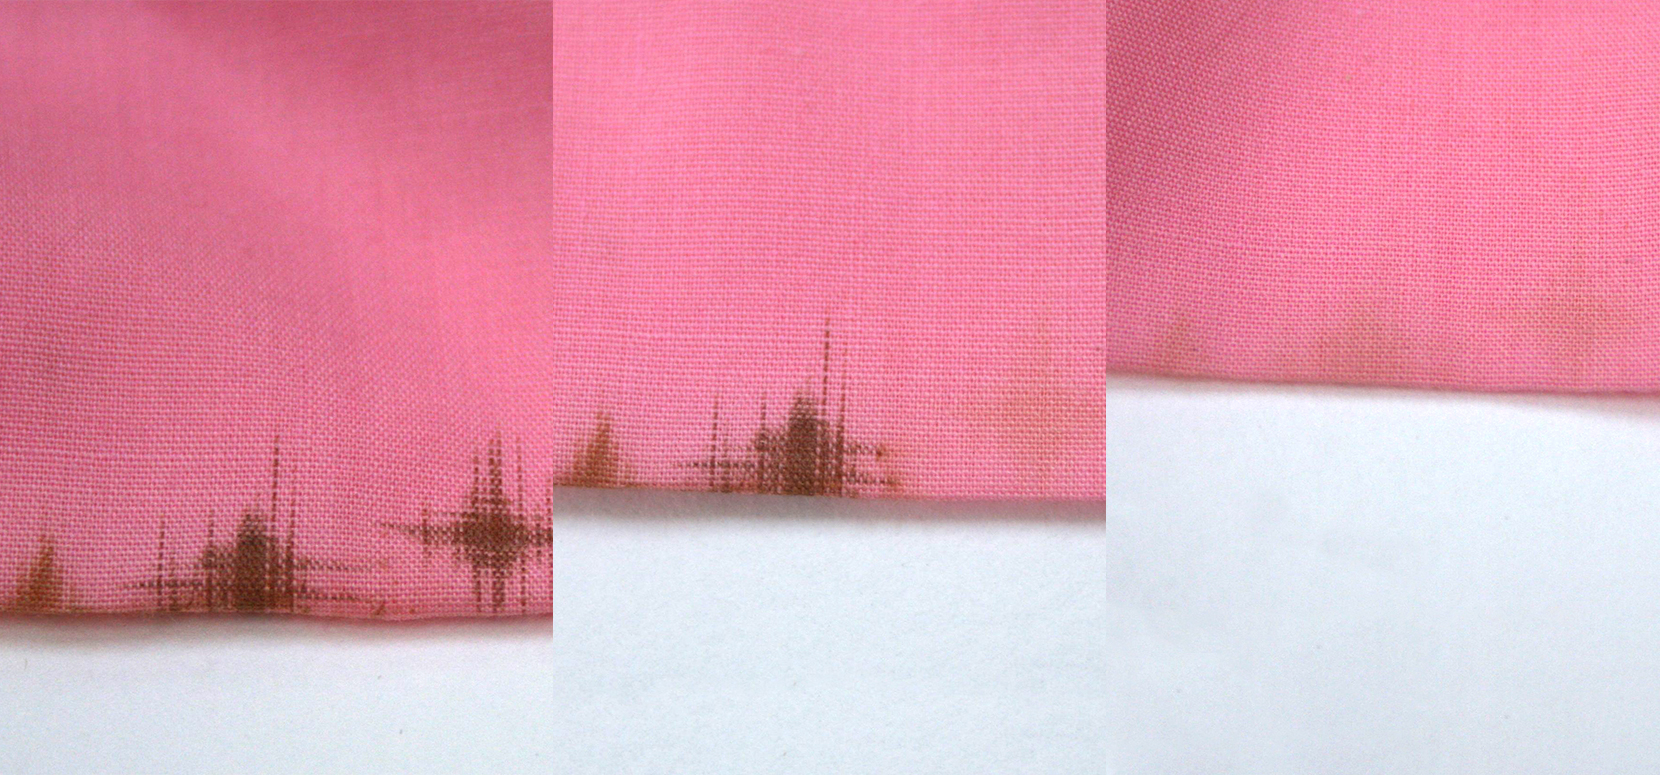 Before, during and after conservation treatment on a piece of pink fabric showing stain removal. 